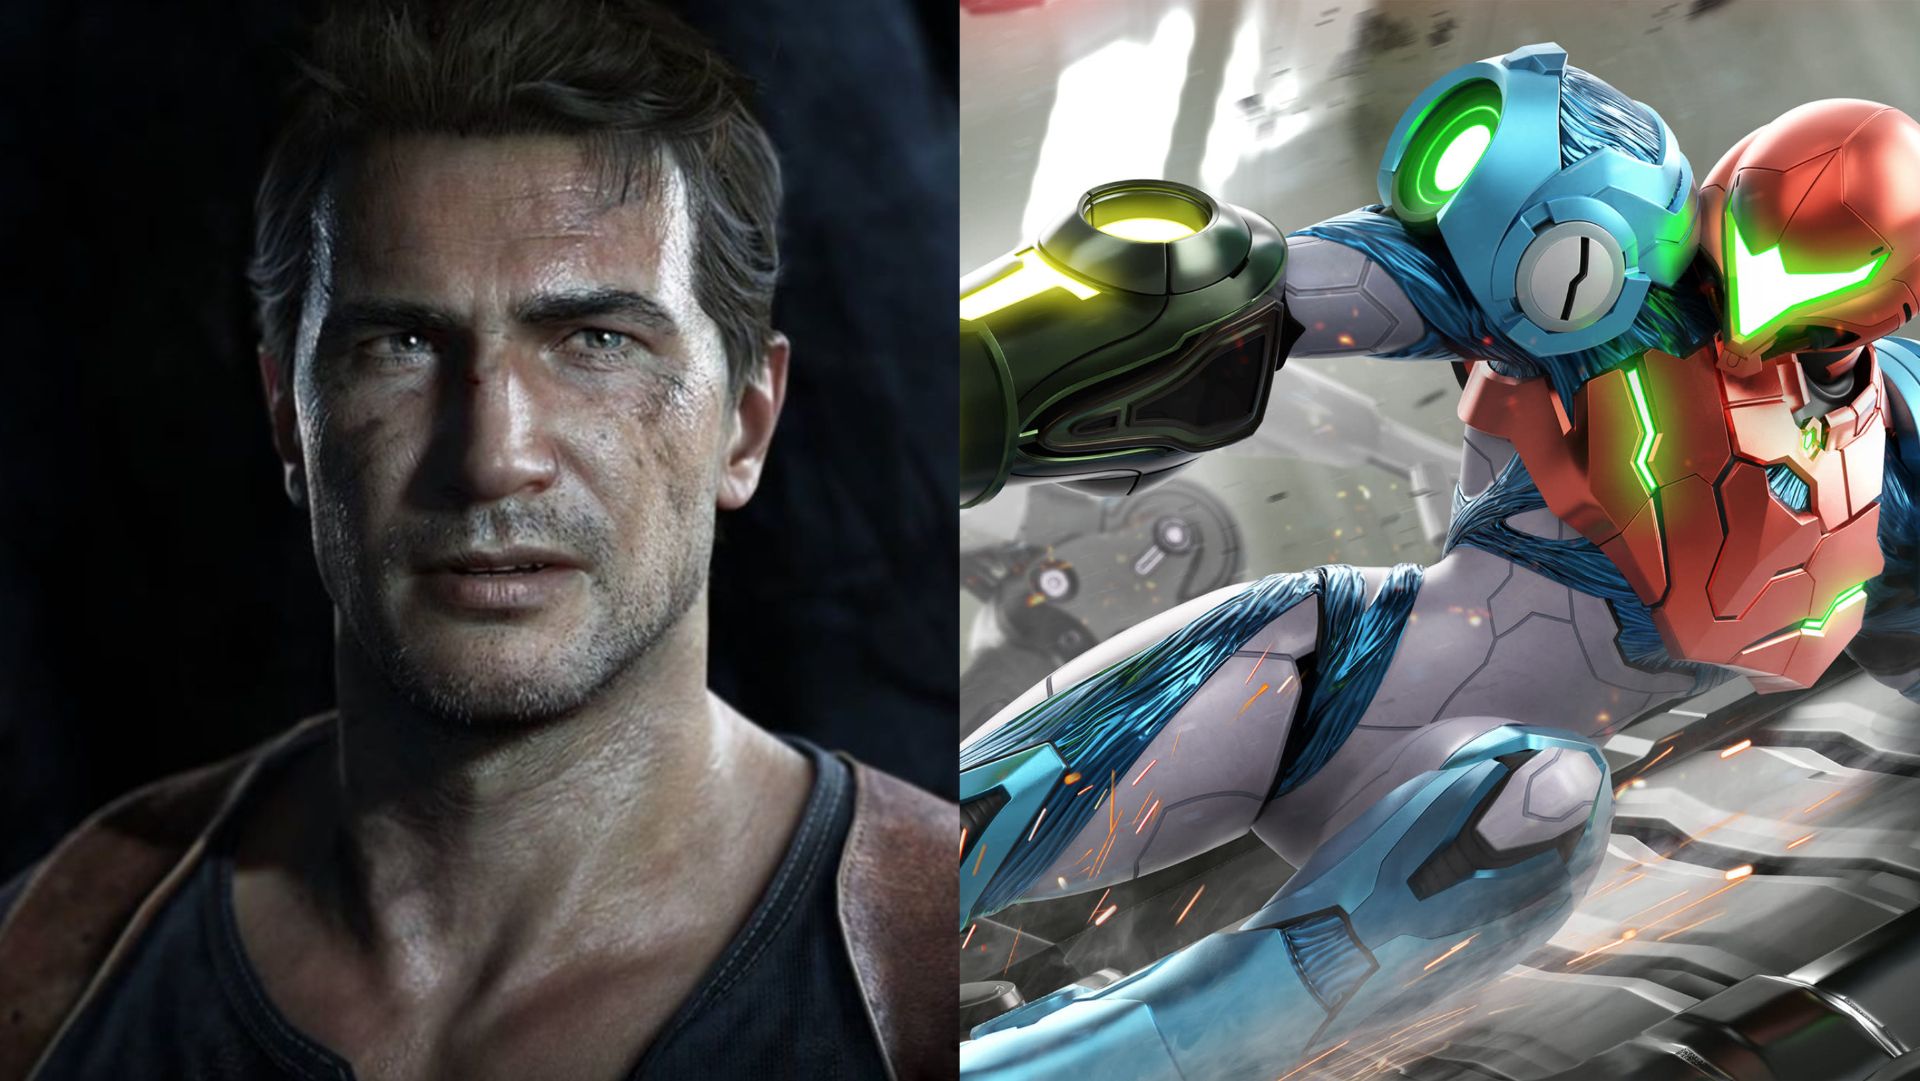 10 Video Game Characters You Didn't Know Are Based On Real People